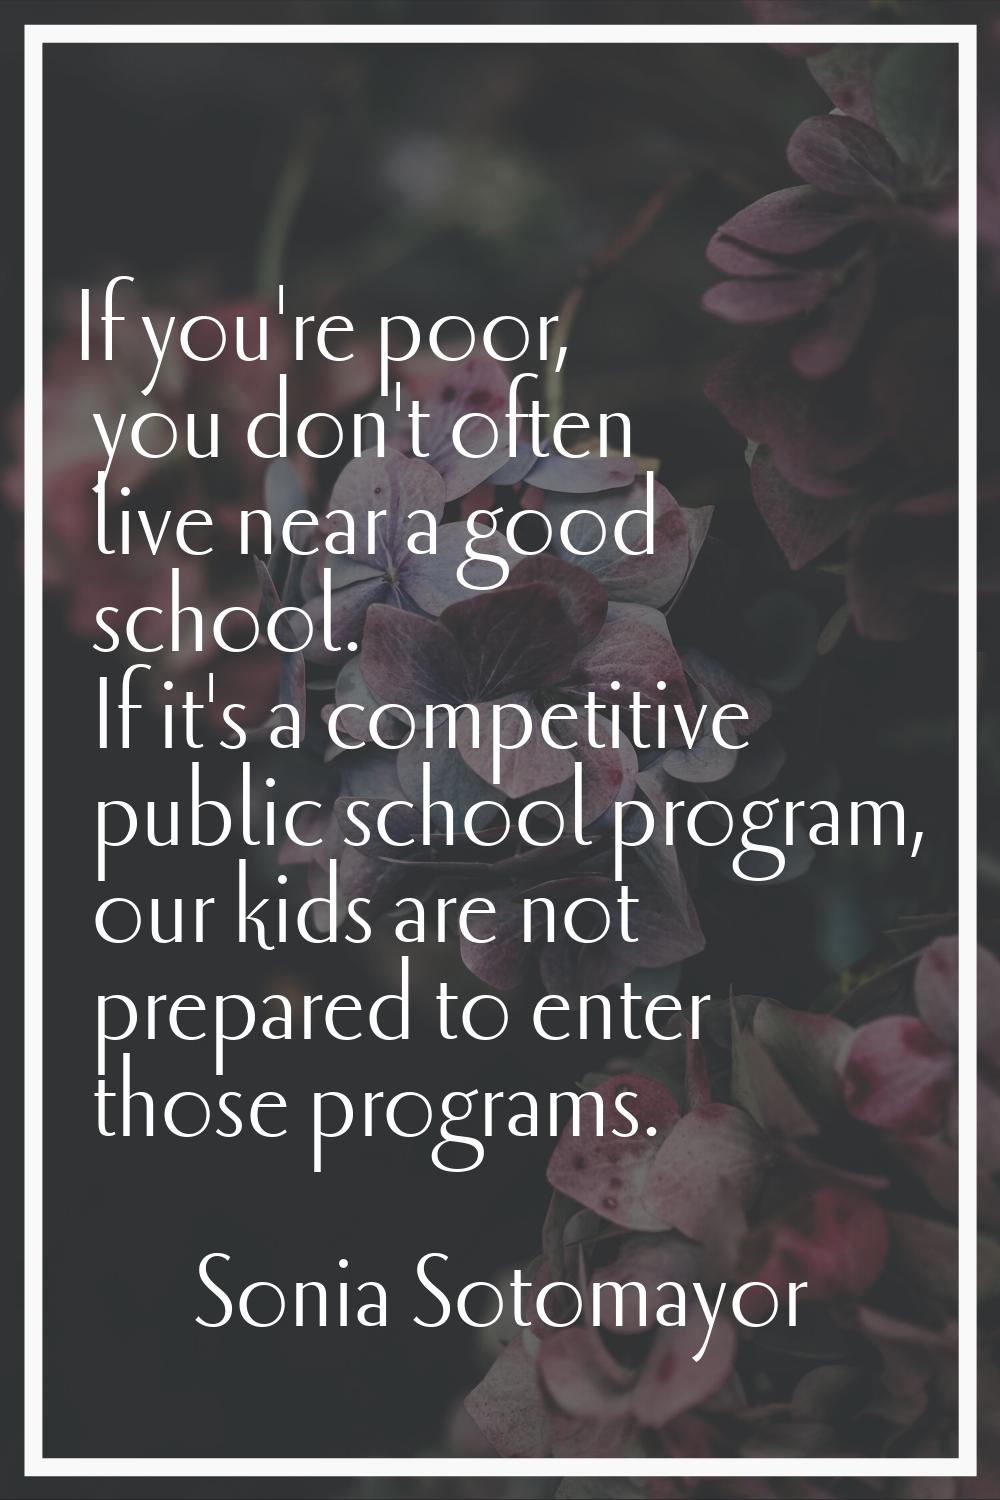 If you're poor, you don't often live near a good school. If it's a competitive public school progra